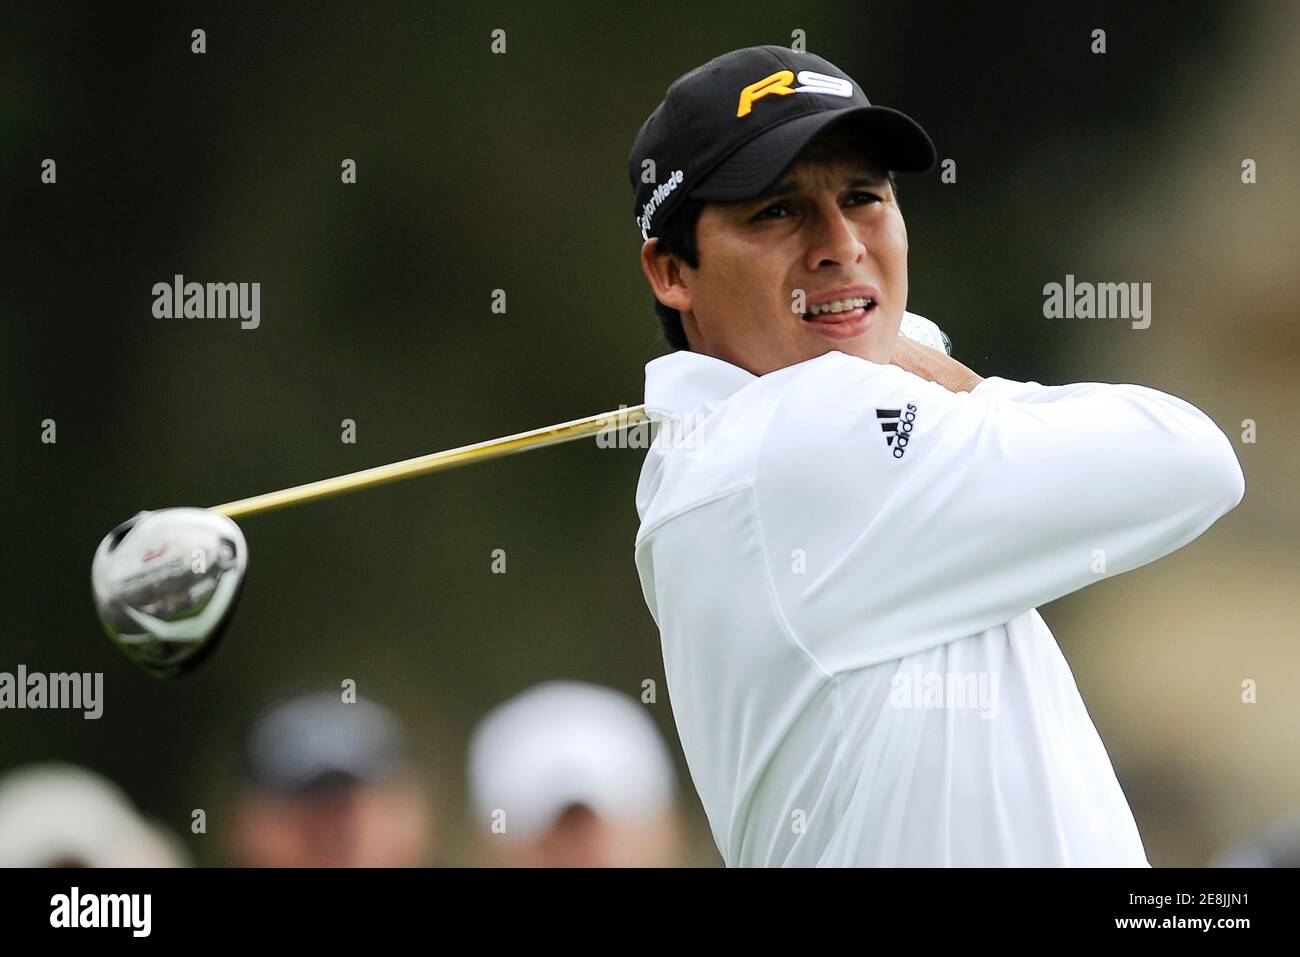 Andres Romero of Argentina drives on the second hole during the final round of the Northern Trust Open golf tournament in the Pacific Palisades area of Los Angeles February 22, 2009.  REUTERS/Gus Ruelas (UNITED STATES) Stock Photo